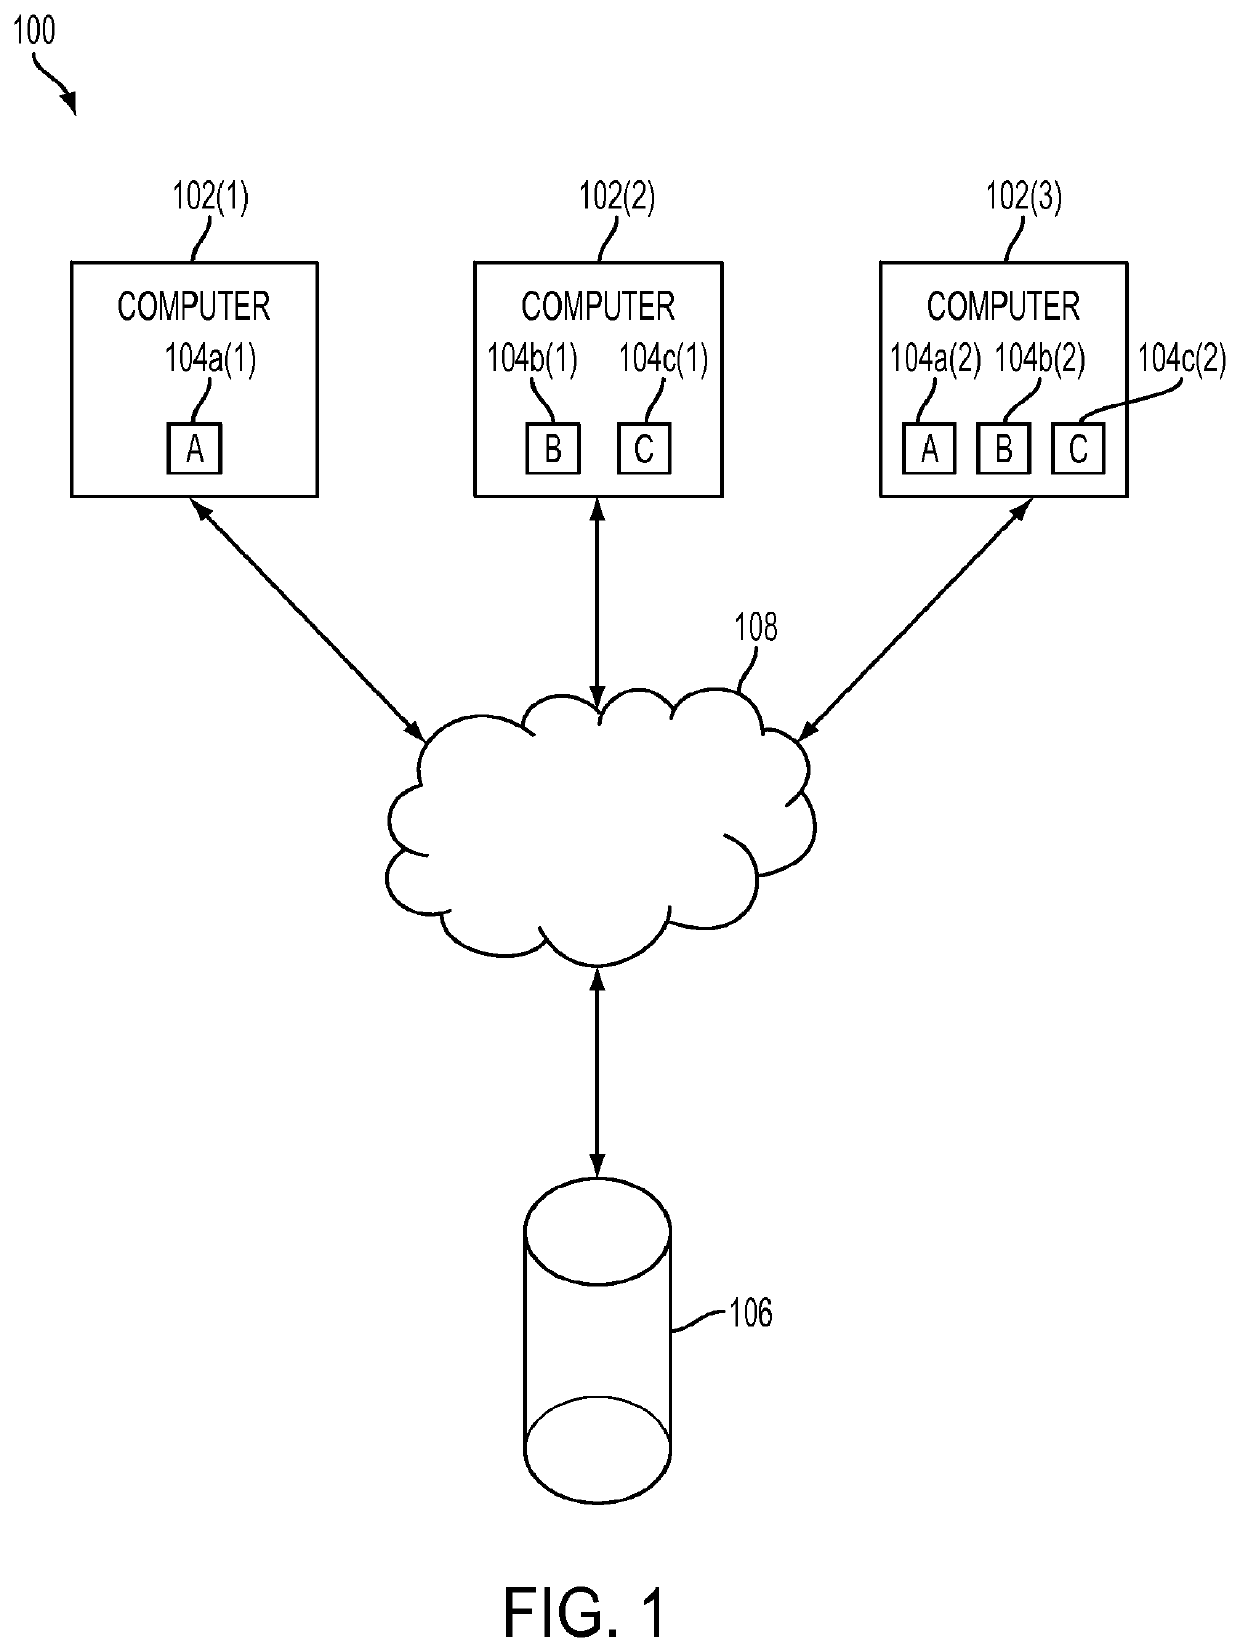 System and Method for Optimizing Resource Utilization in a Clustered or Cloud Environment